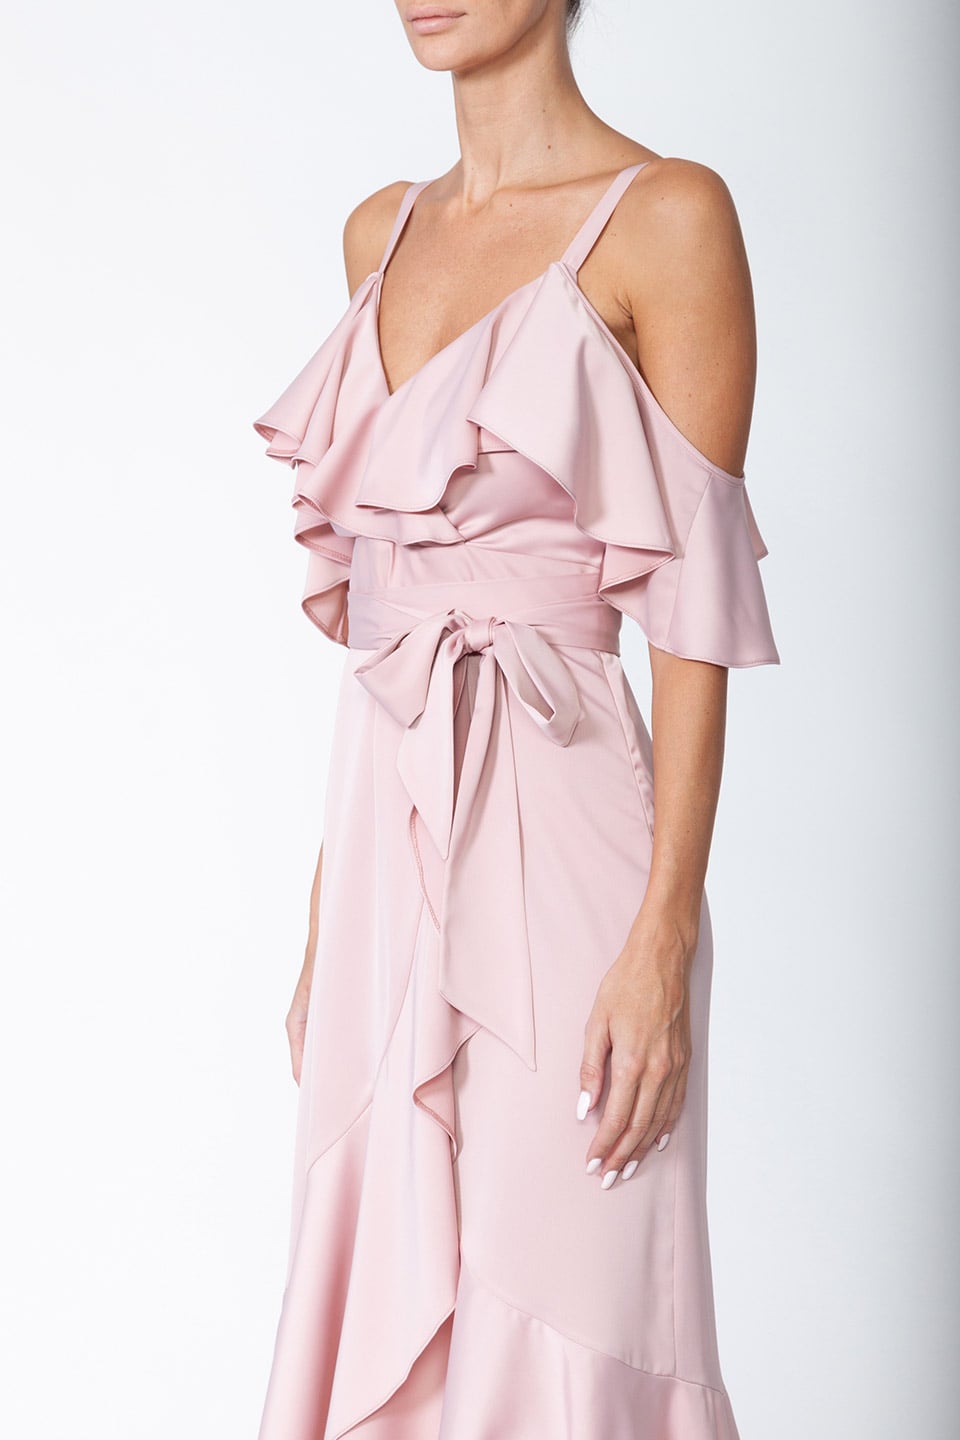 Thumbnail for Product gallery 4, Stylist Anze's pink midi dress with asymmetrical wrap silhouette, side details